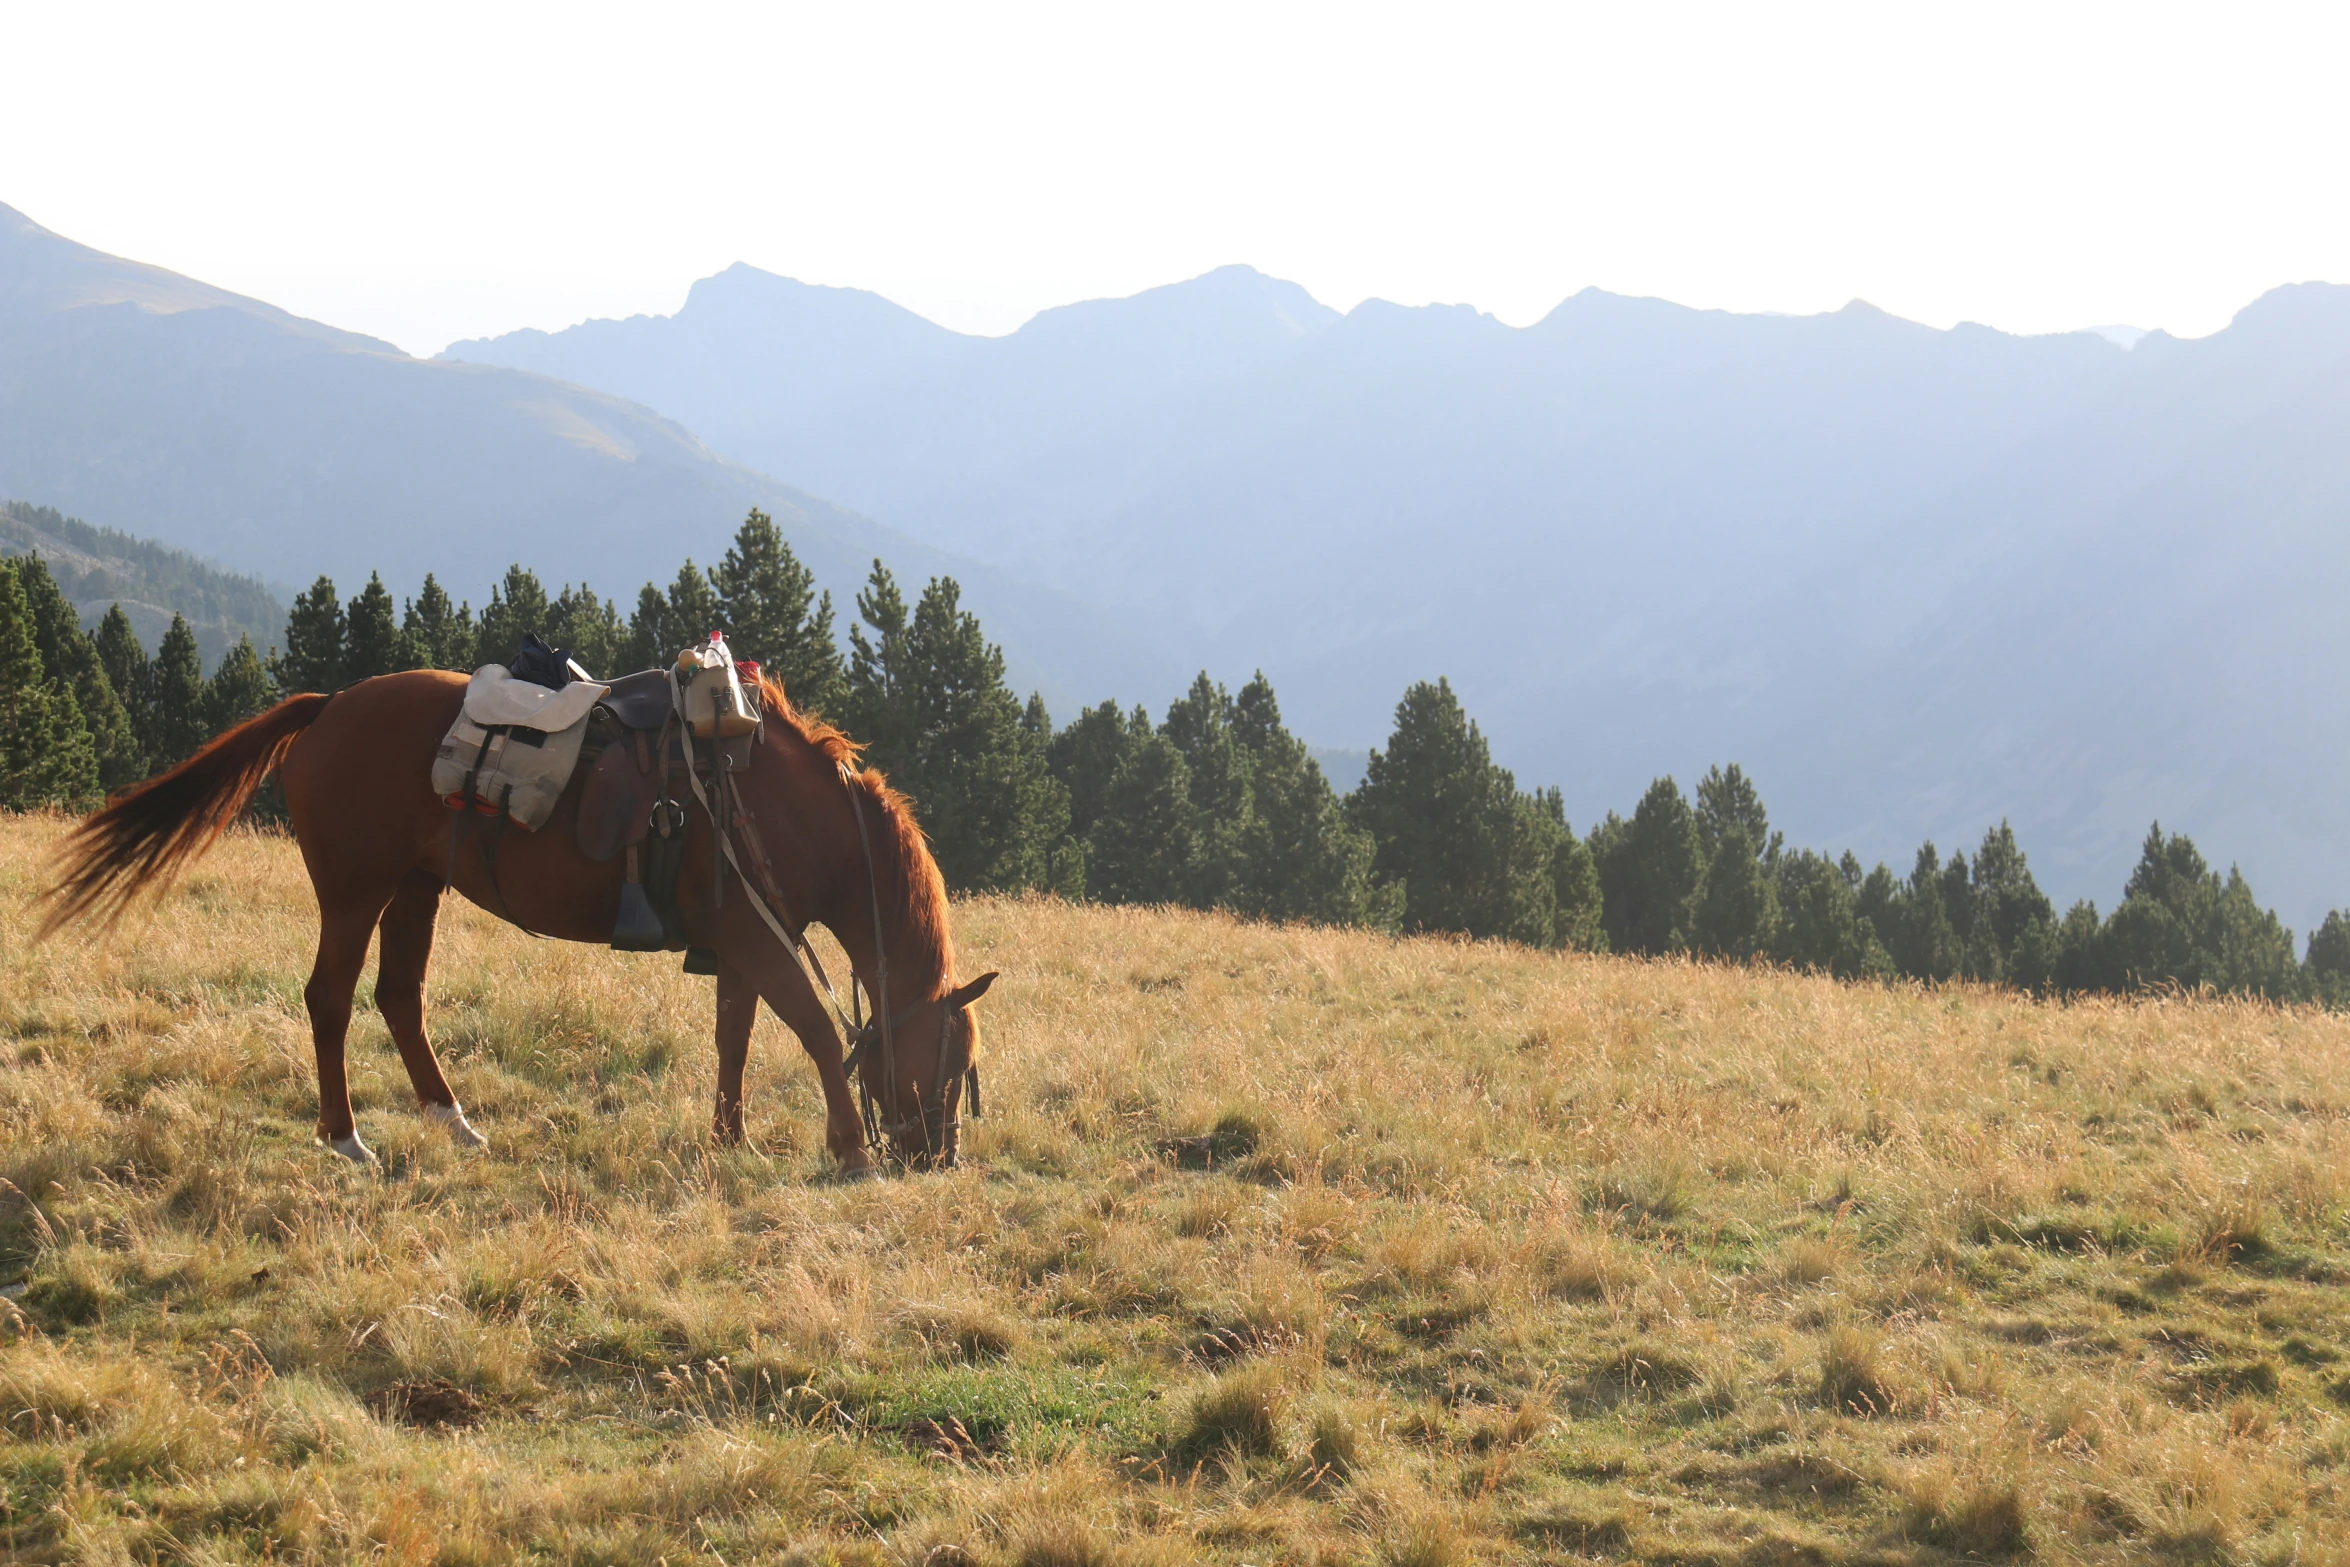 a brown horse eating some grass on the side of a mountain